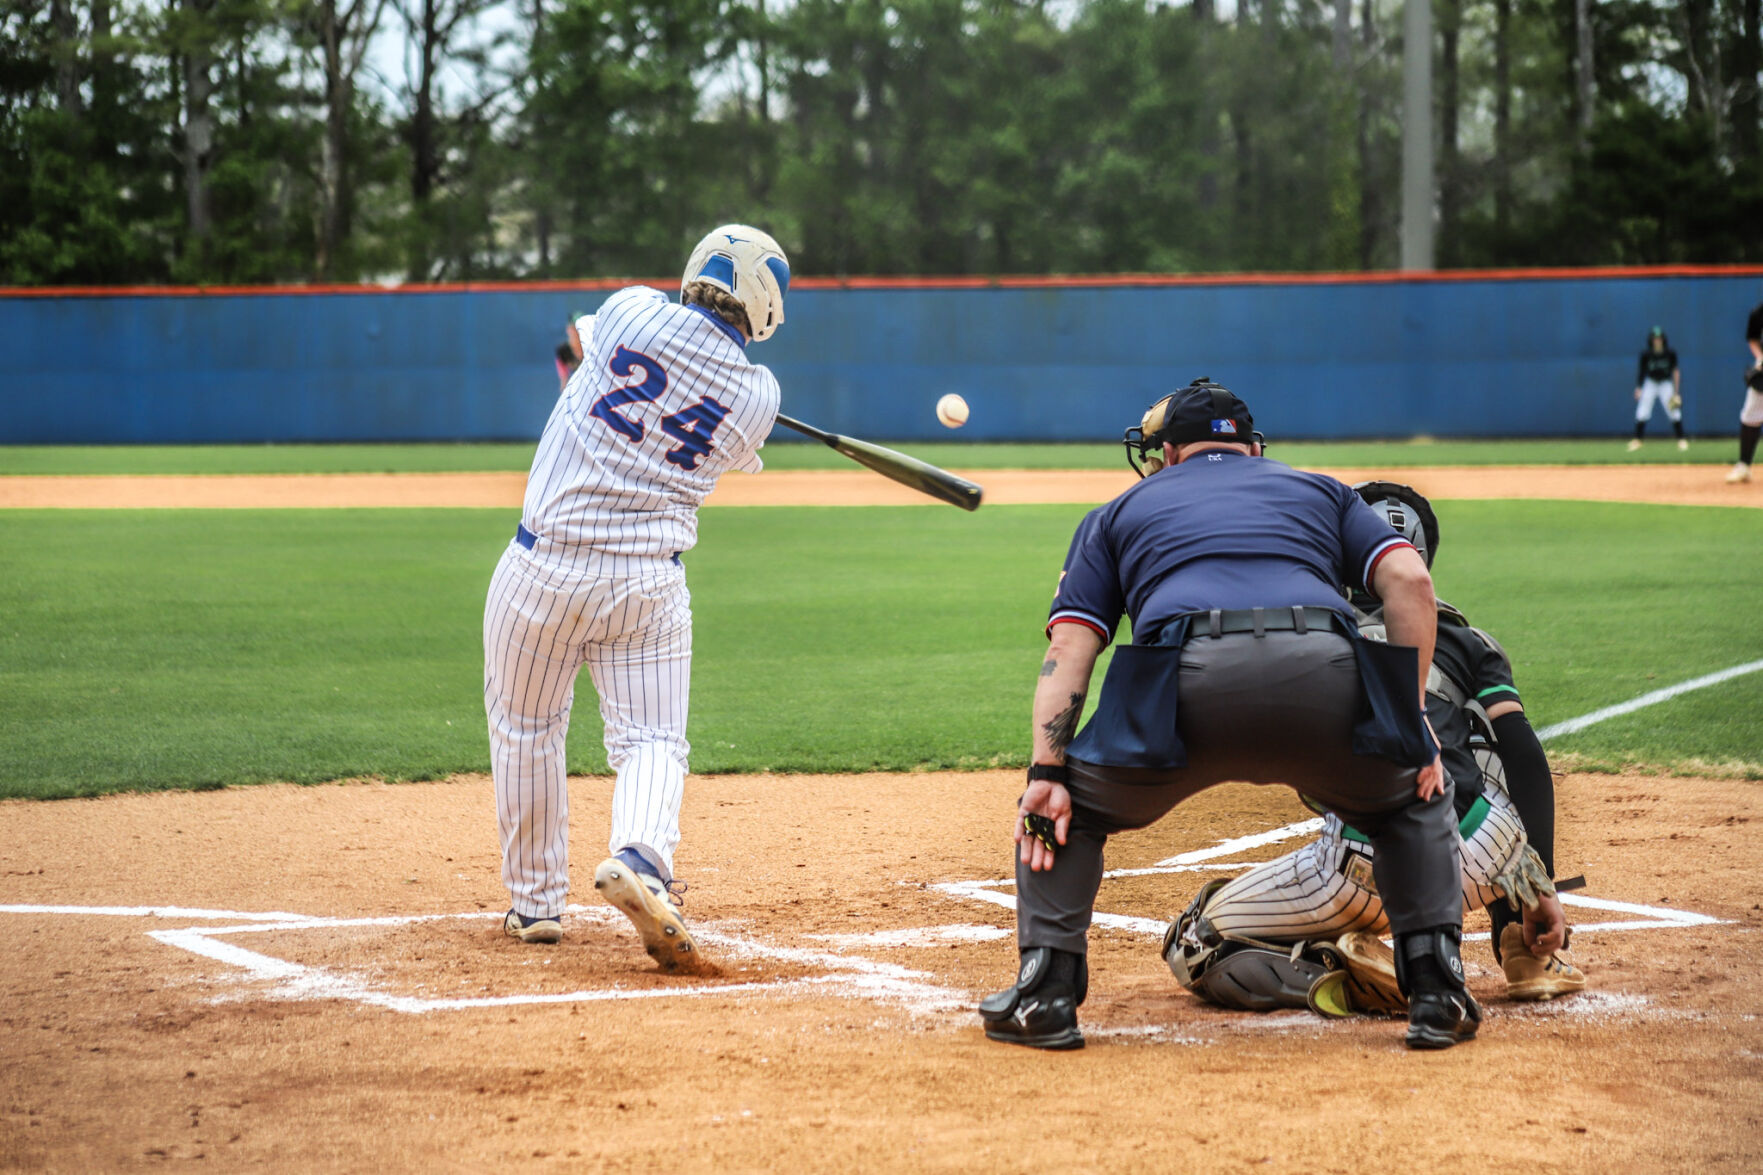 Northwest Whitfield High School Beats Murray County 6-5 to End Losing Streak; Vineyard’s Home Runs and Doubles Impactful